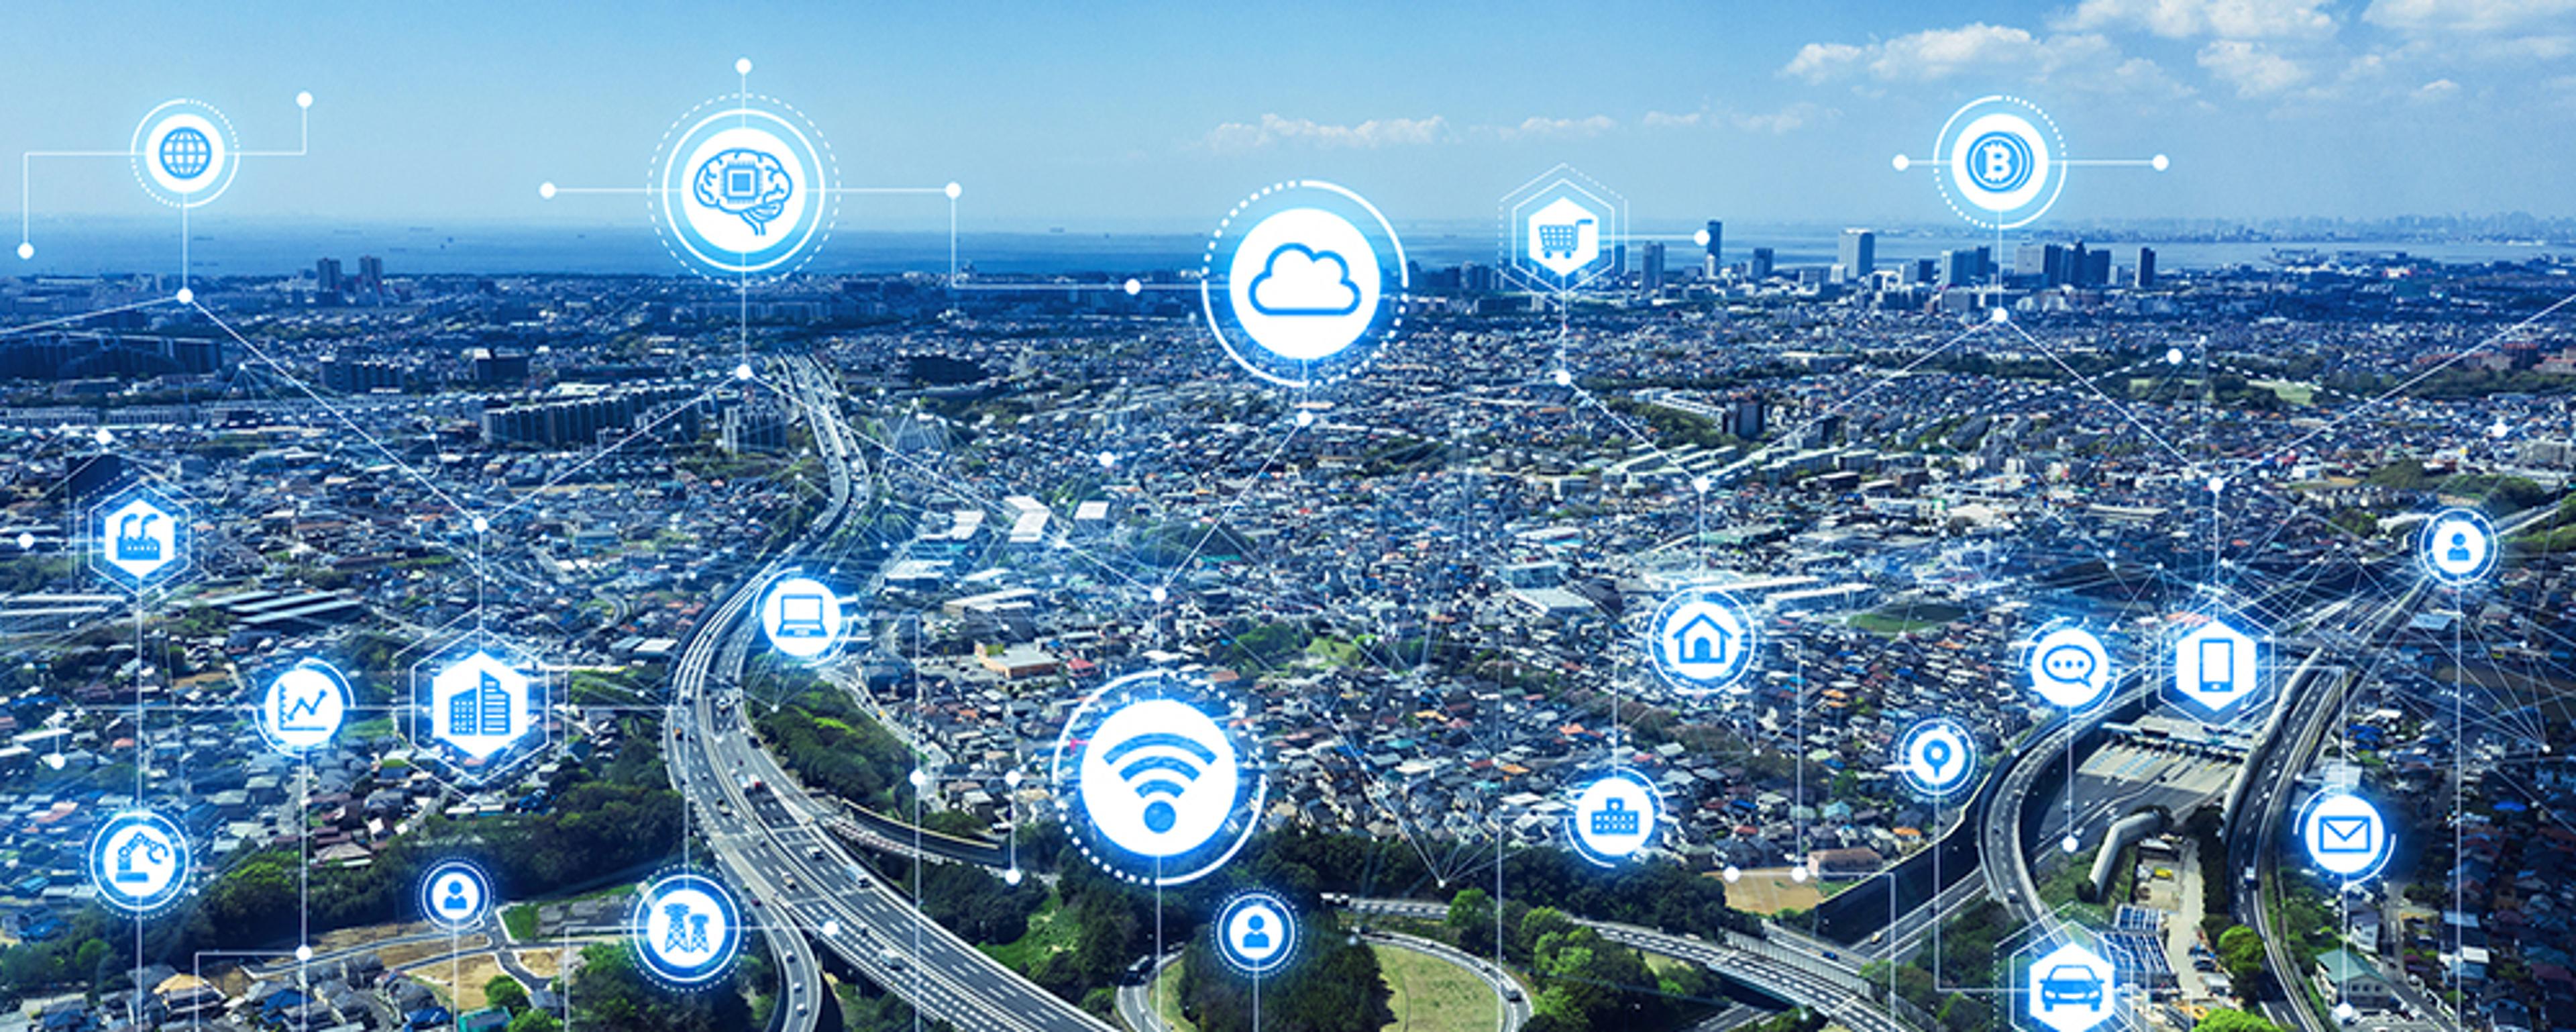 Balancing Privacy and Innovation in Smart Cities and Communities